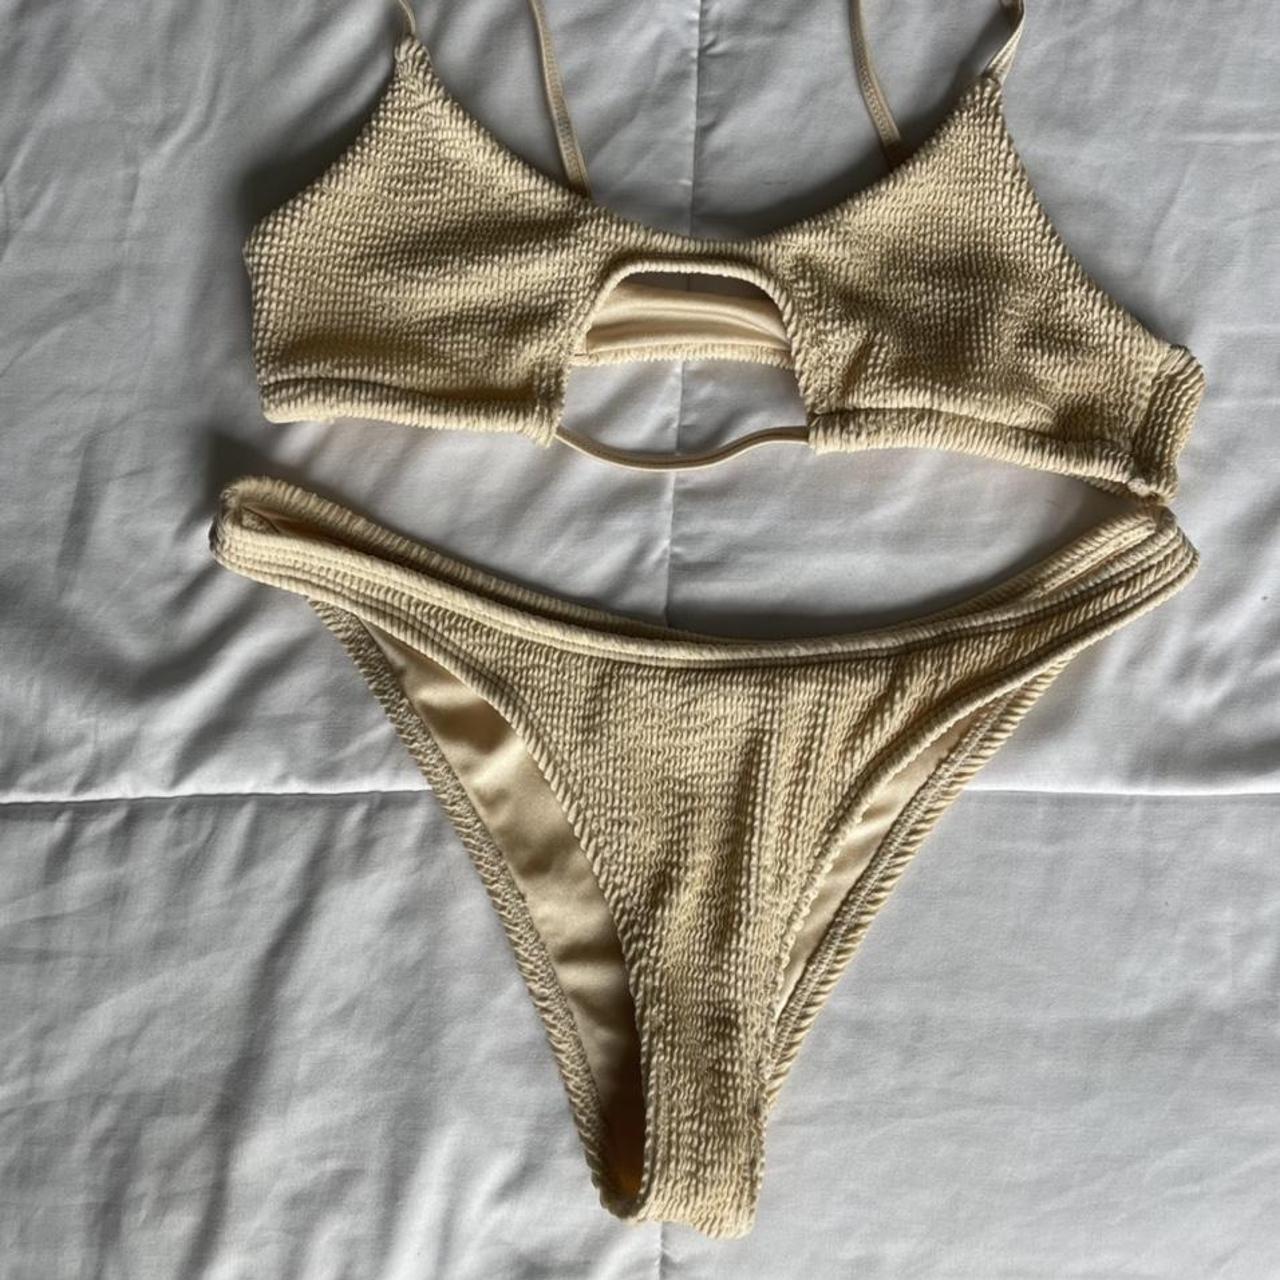 Product Image 2 - Ribbed LOUNGE bathing suit 🤎
-only